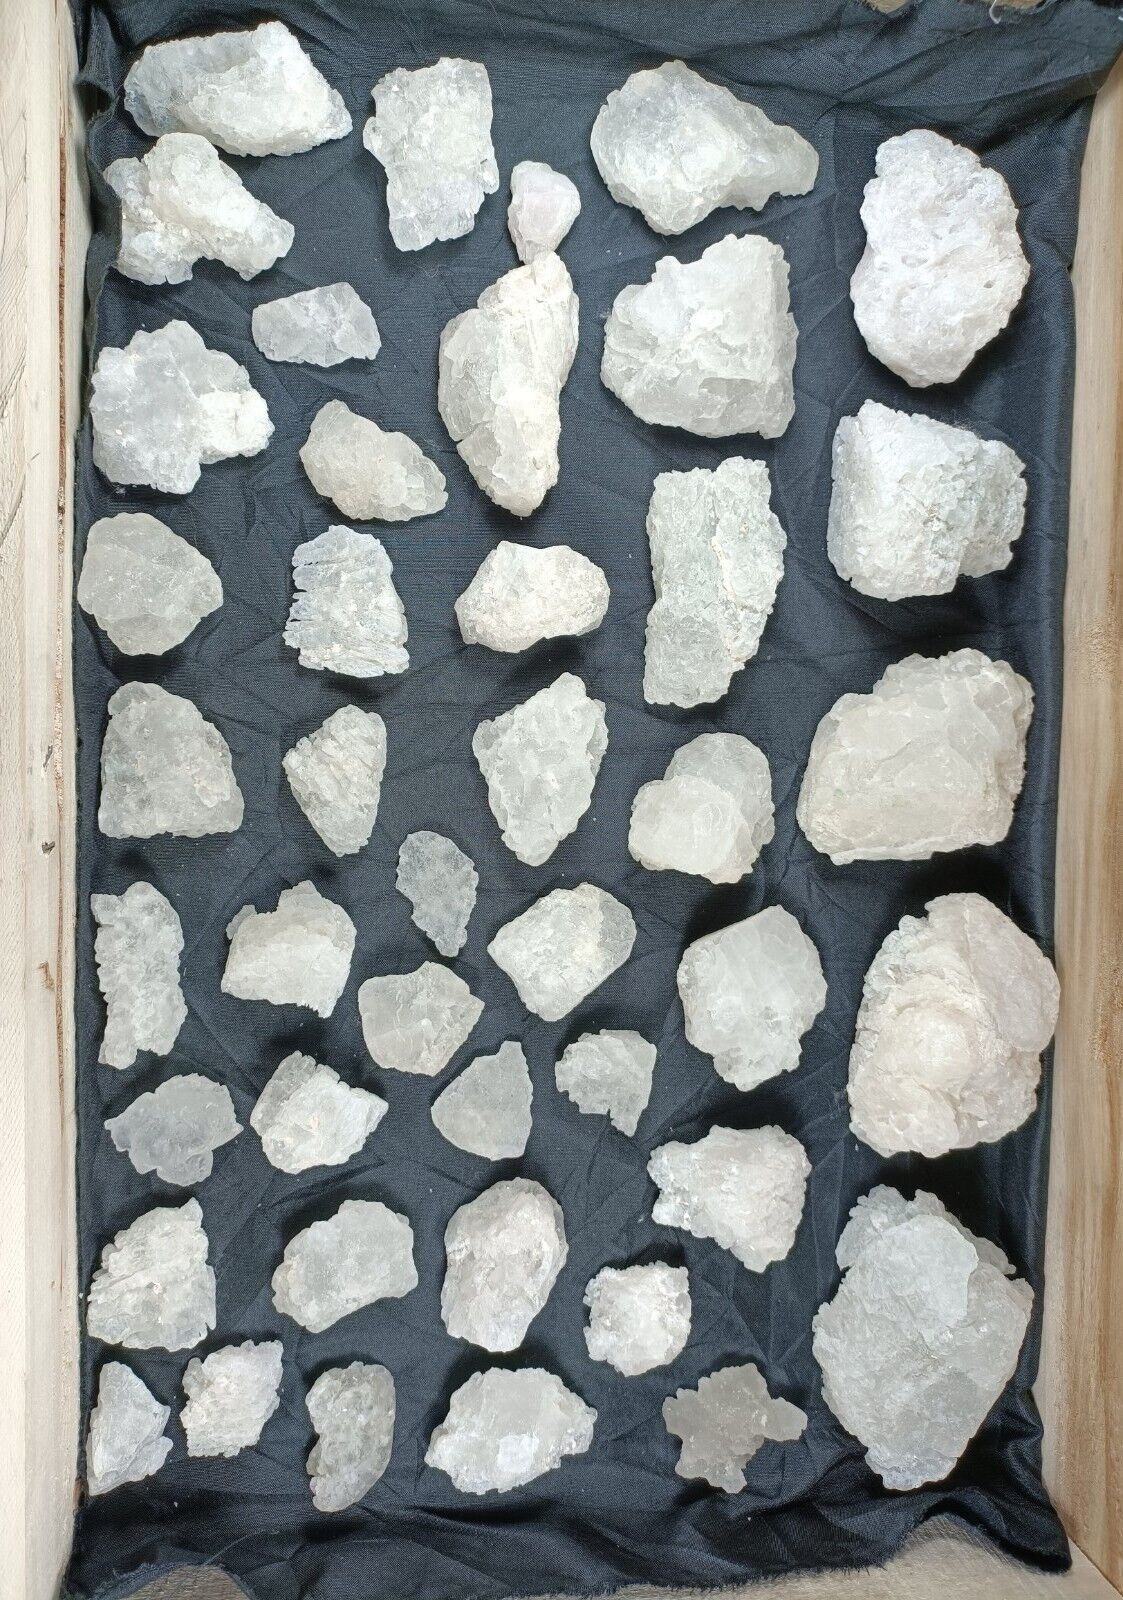 2.5-KG Etched Pollucite Natural Crystals Lot (50 Crystals) from skardu, Pakistan